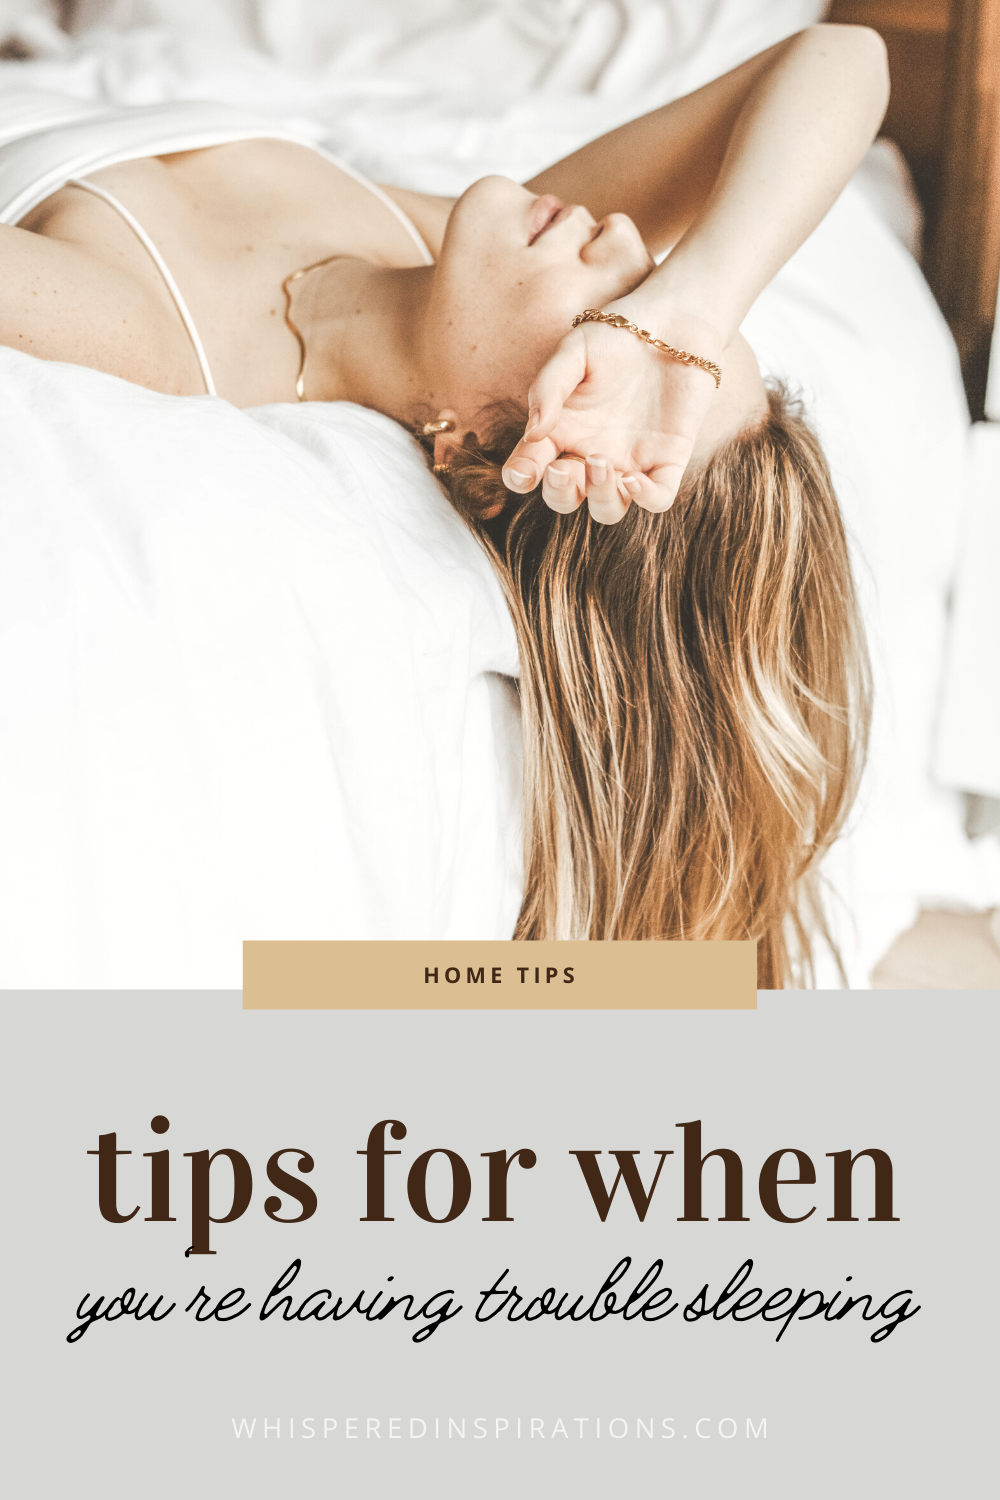 Woman lies with arm over her eyes, she looks tired and is lying in bed. This article covers tips for when you're having trouble sleeping.